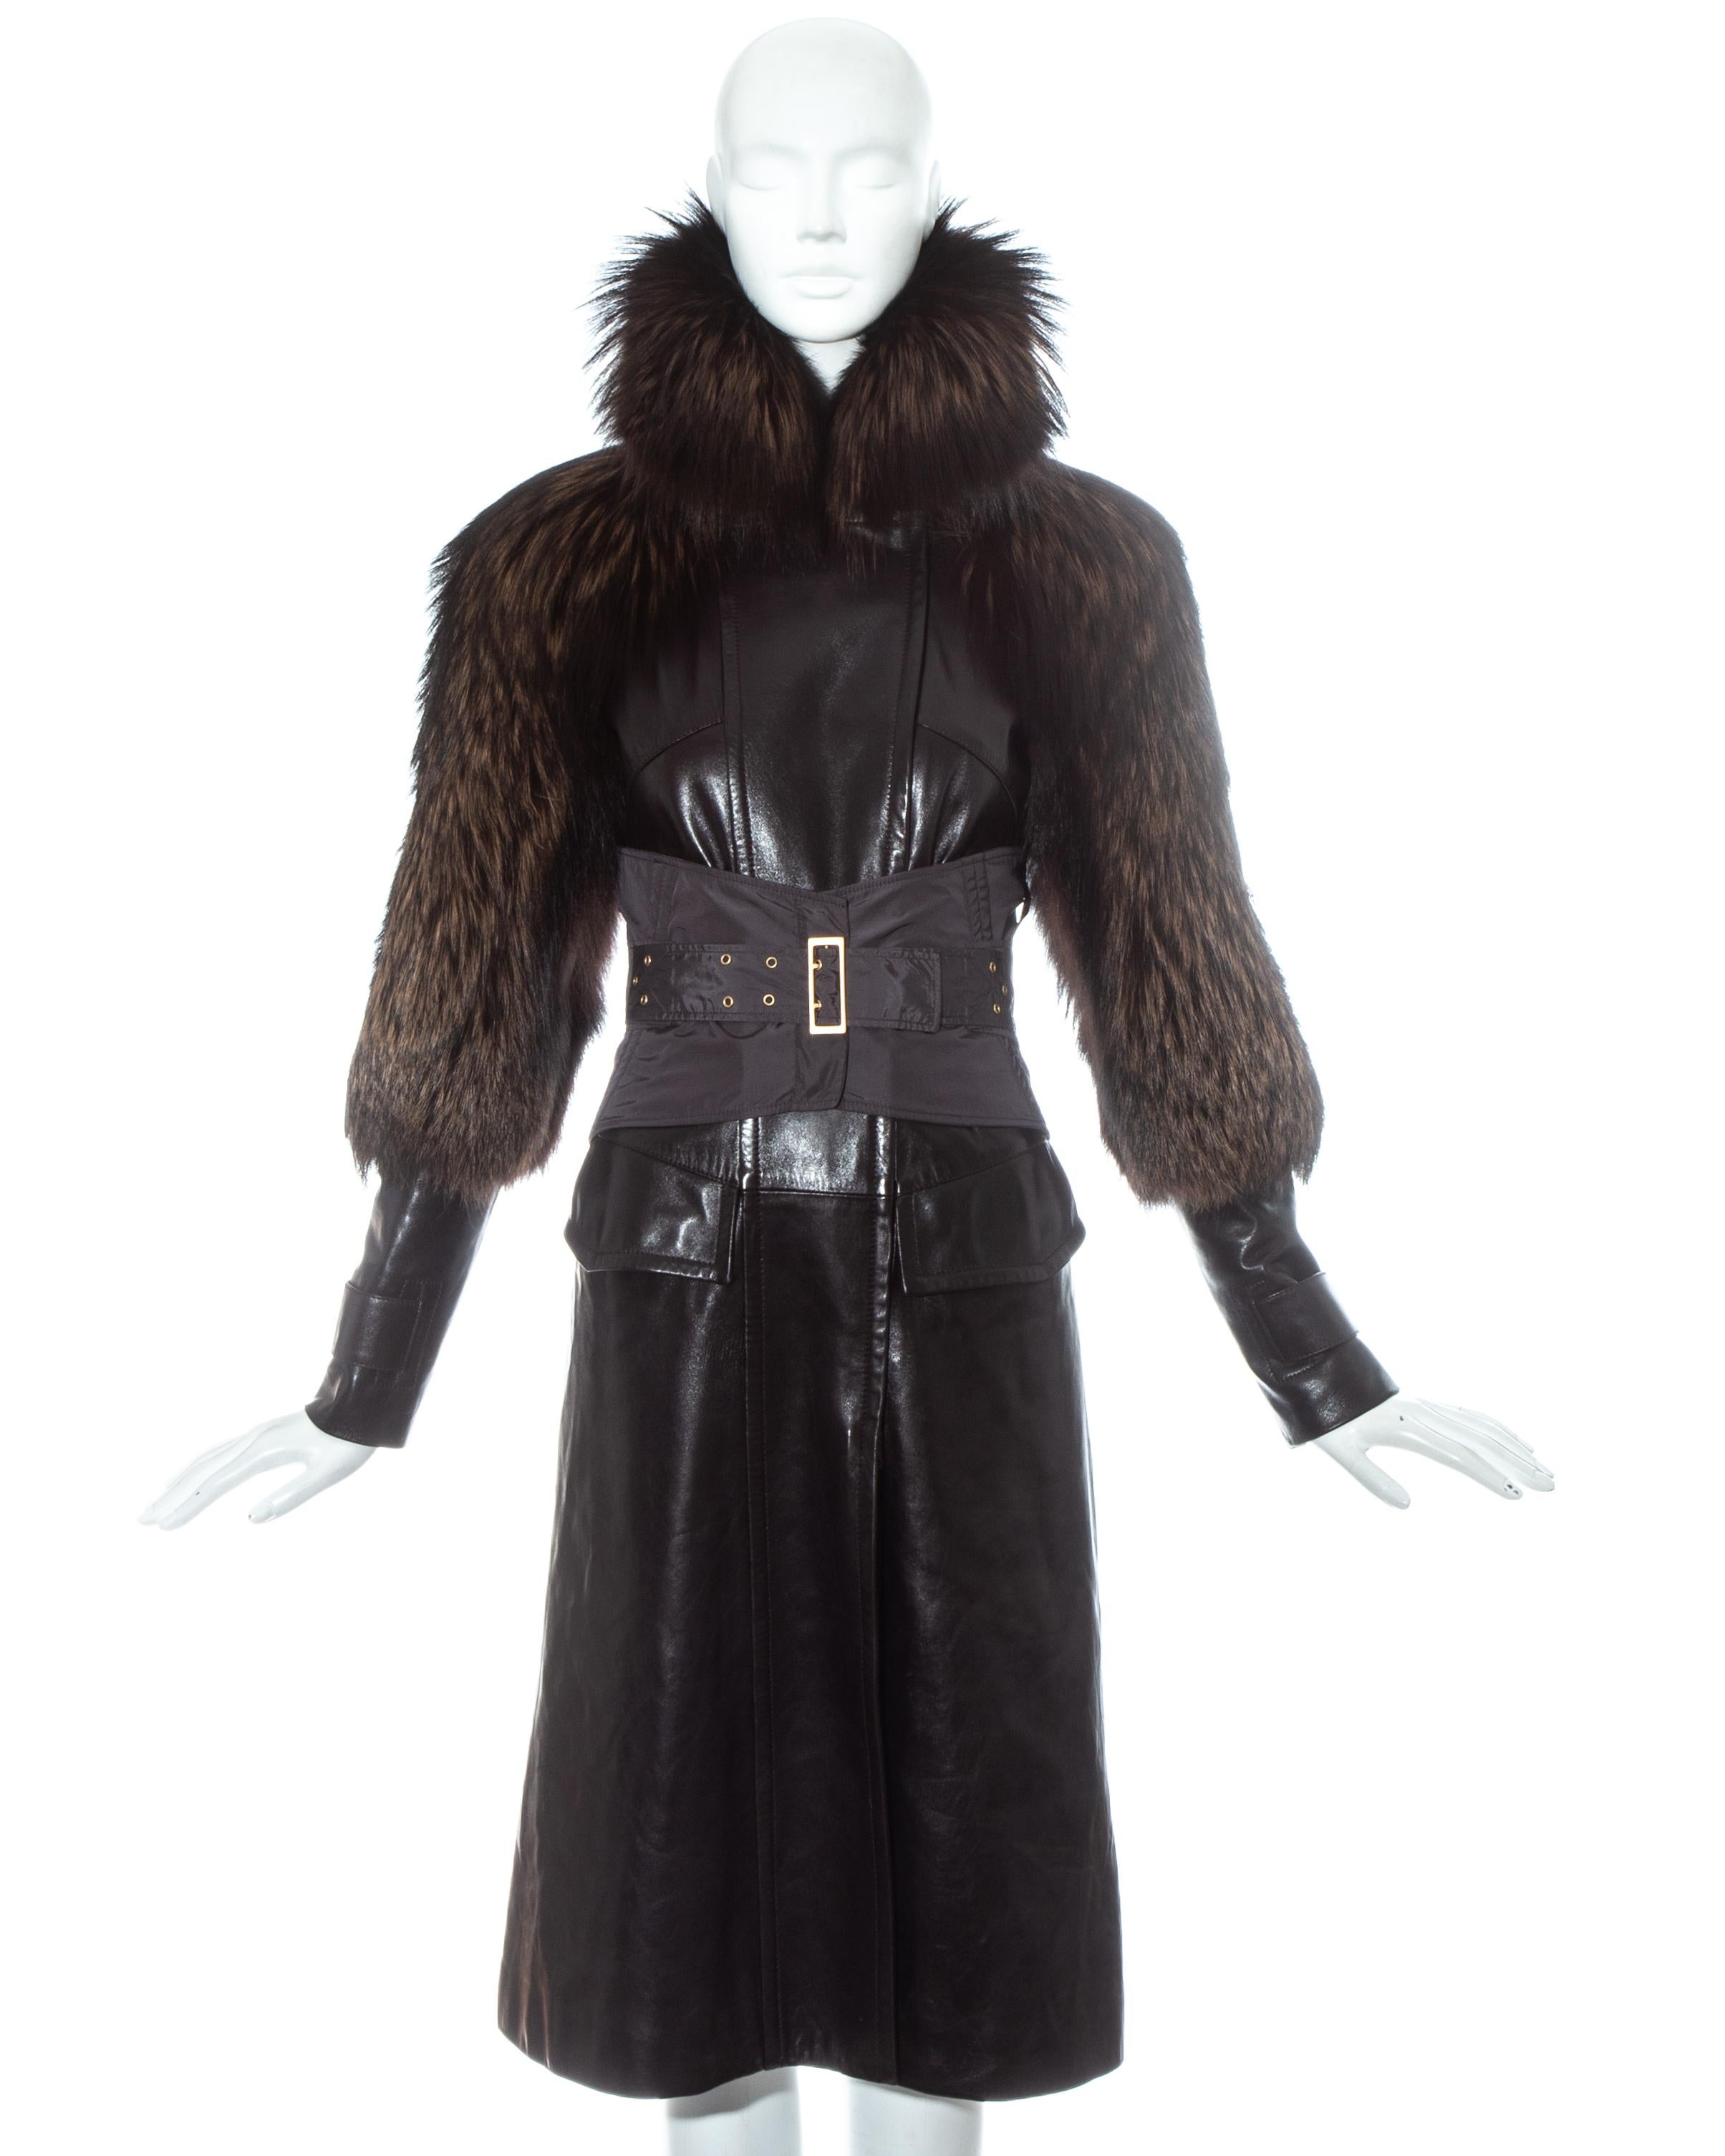 Gucci by Tom Ford brown leather mid length coat with fox fur sleeves and collar.  Detachable nylon corset, double ended zip fastening and 2 front flap pockets.

Fall-Winter 2003